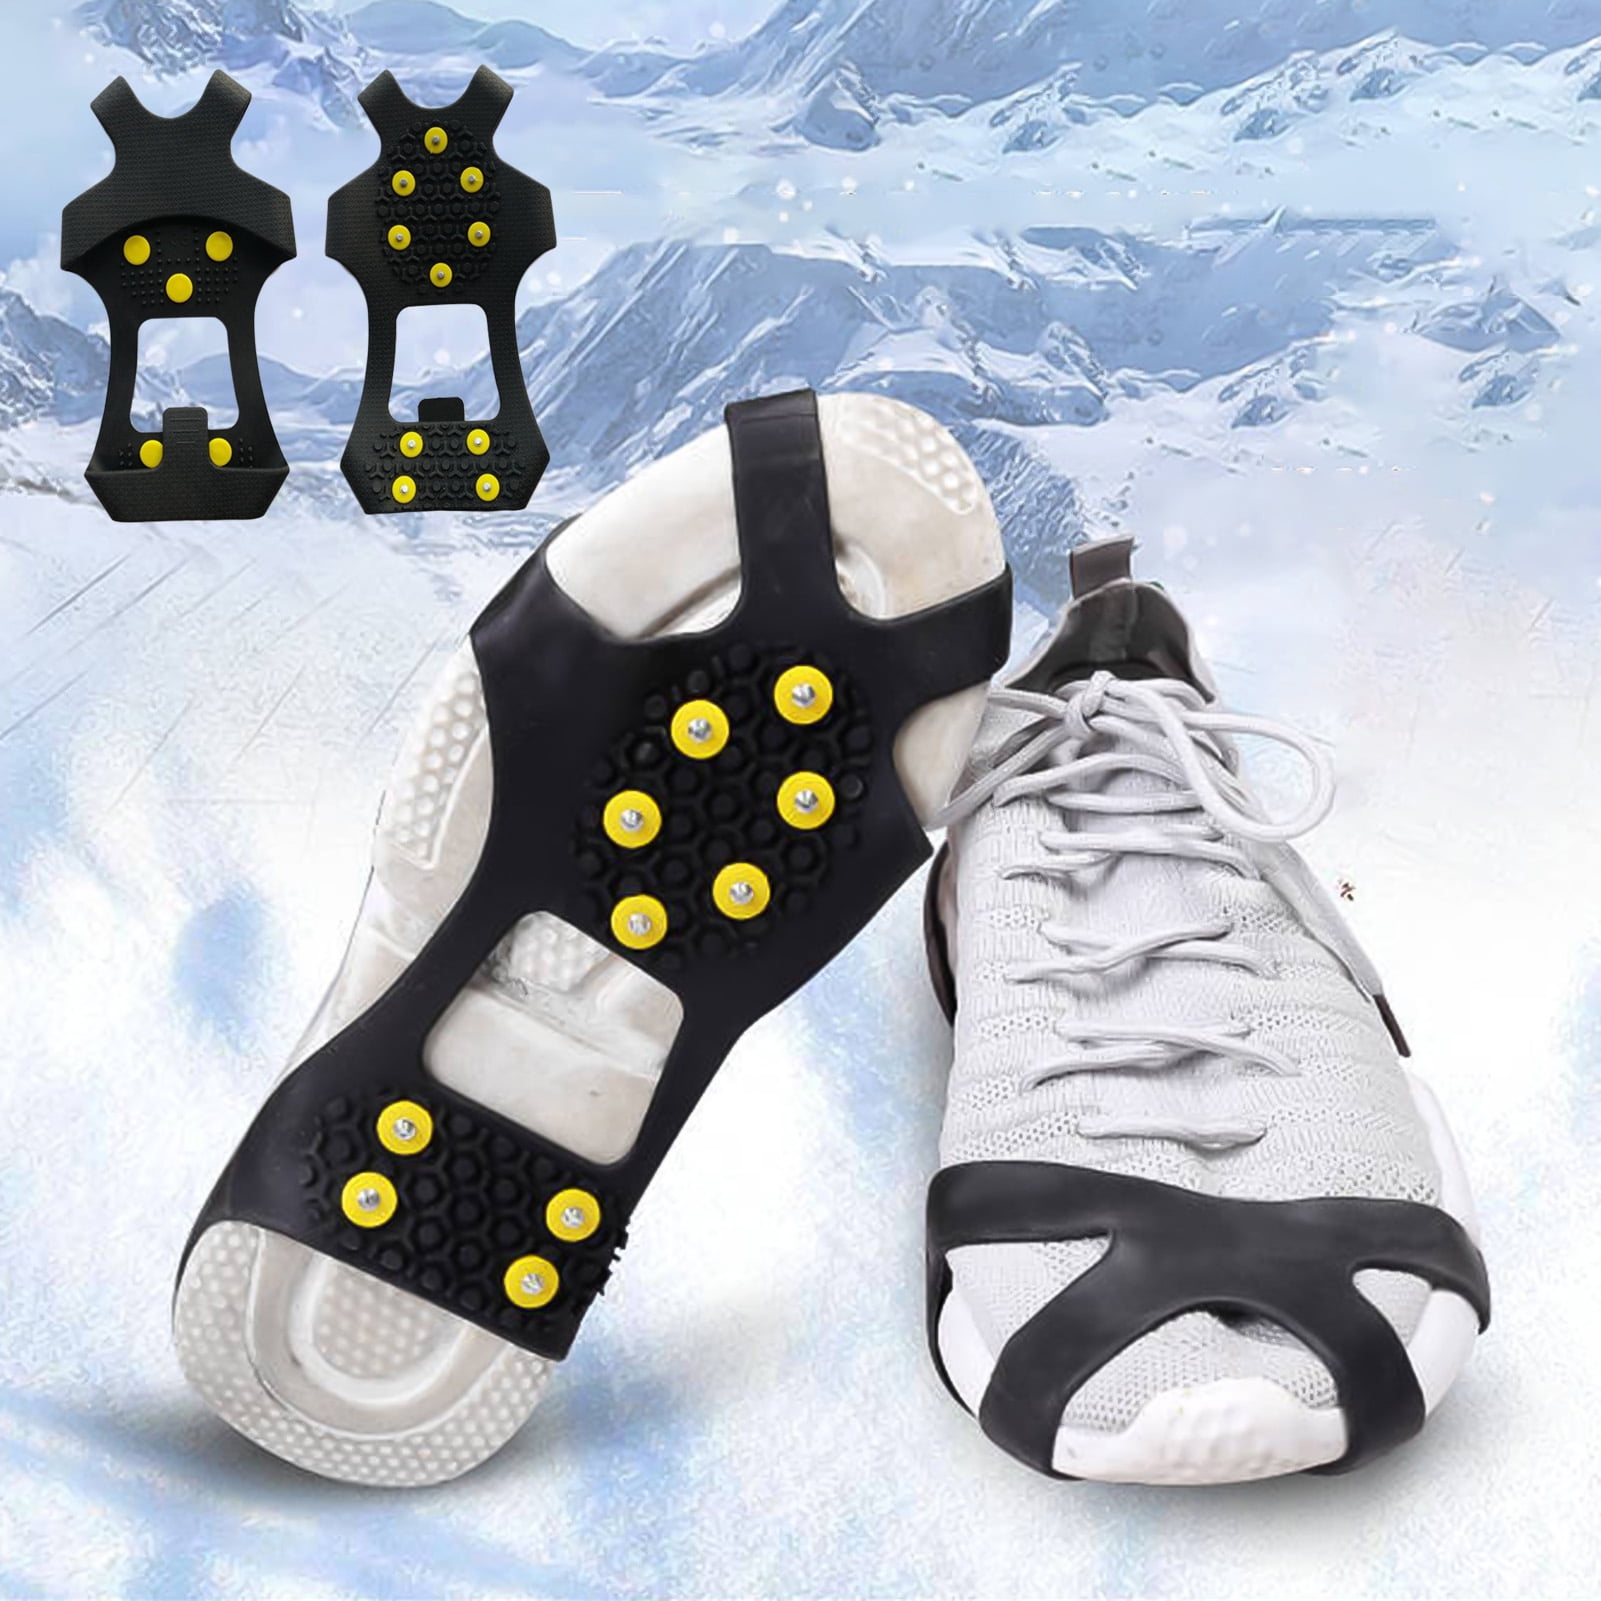 28 Steel Cleats per Foot for a Great Traction on Ice and Snow with 10 Rubber stabilizers Easy to Put On and Off LIFE-SPORTS GEAR Grip Ice Cleats for Boots and Shoes